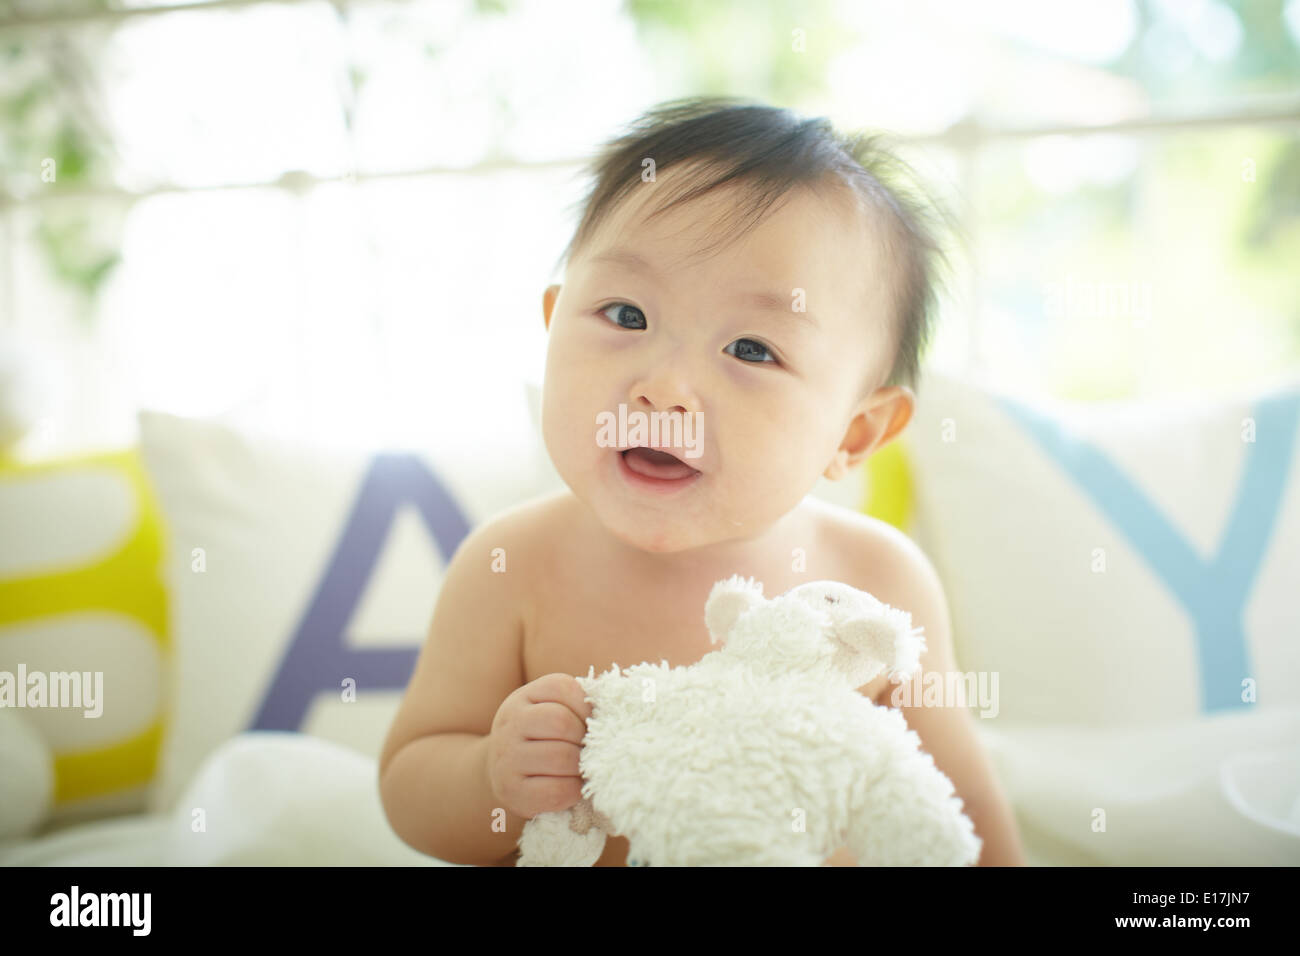 Baby with a big and cute smile Stock Photo